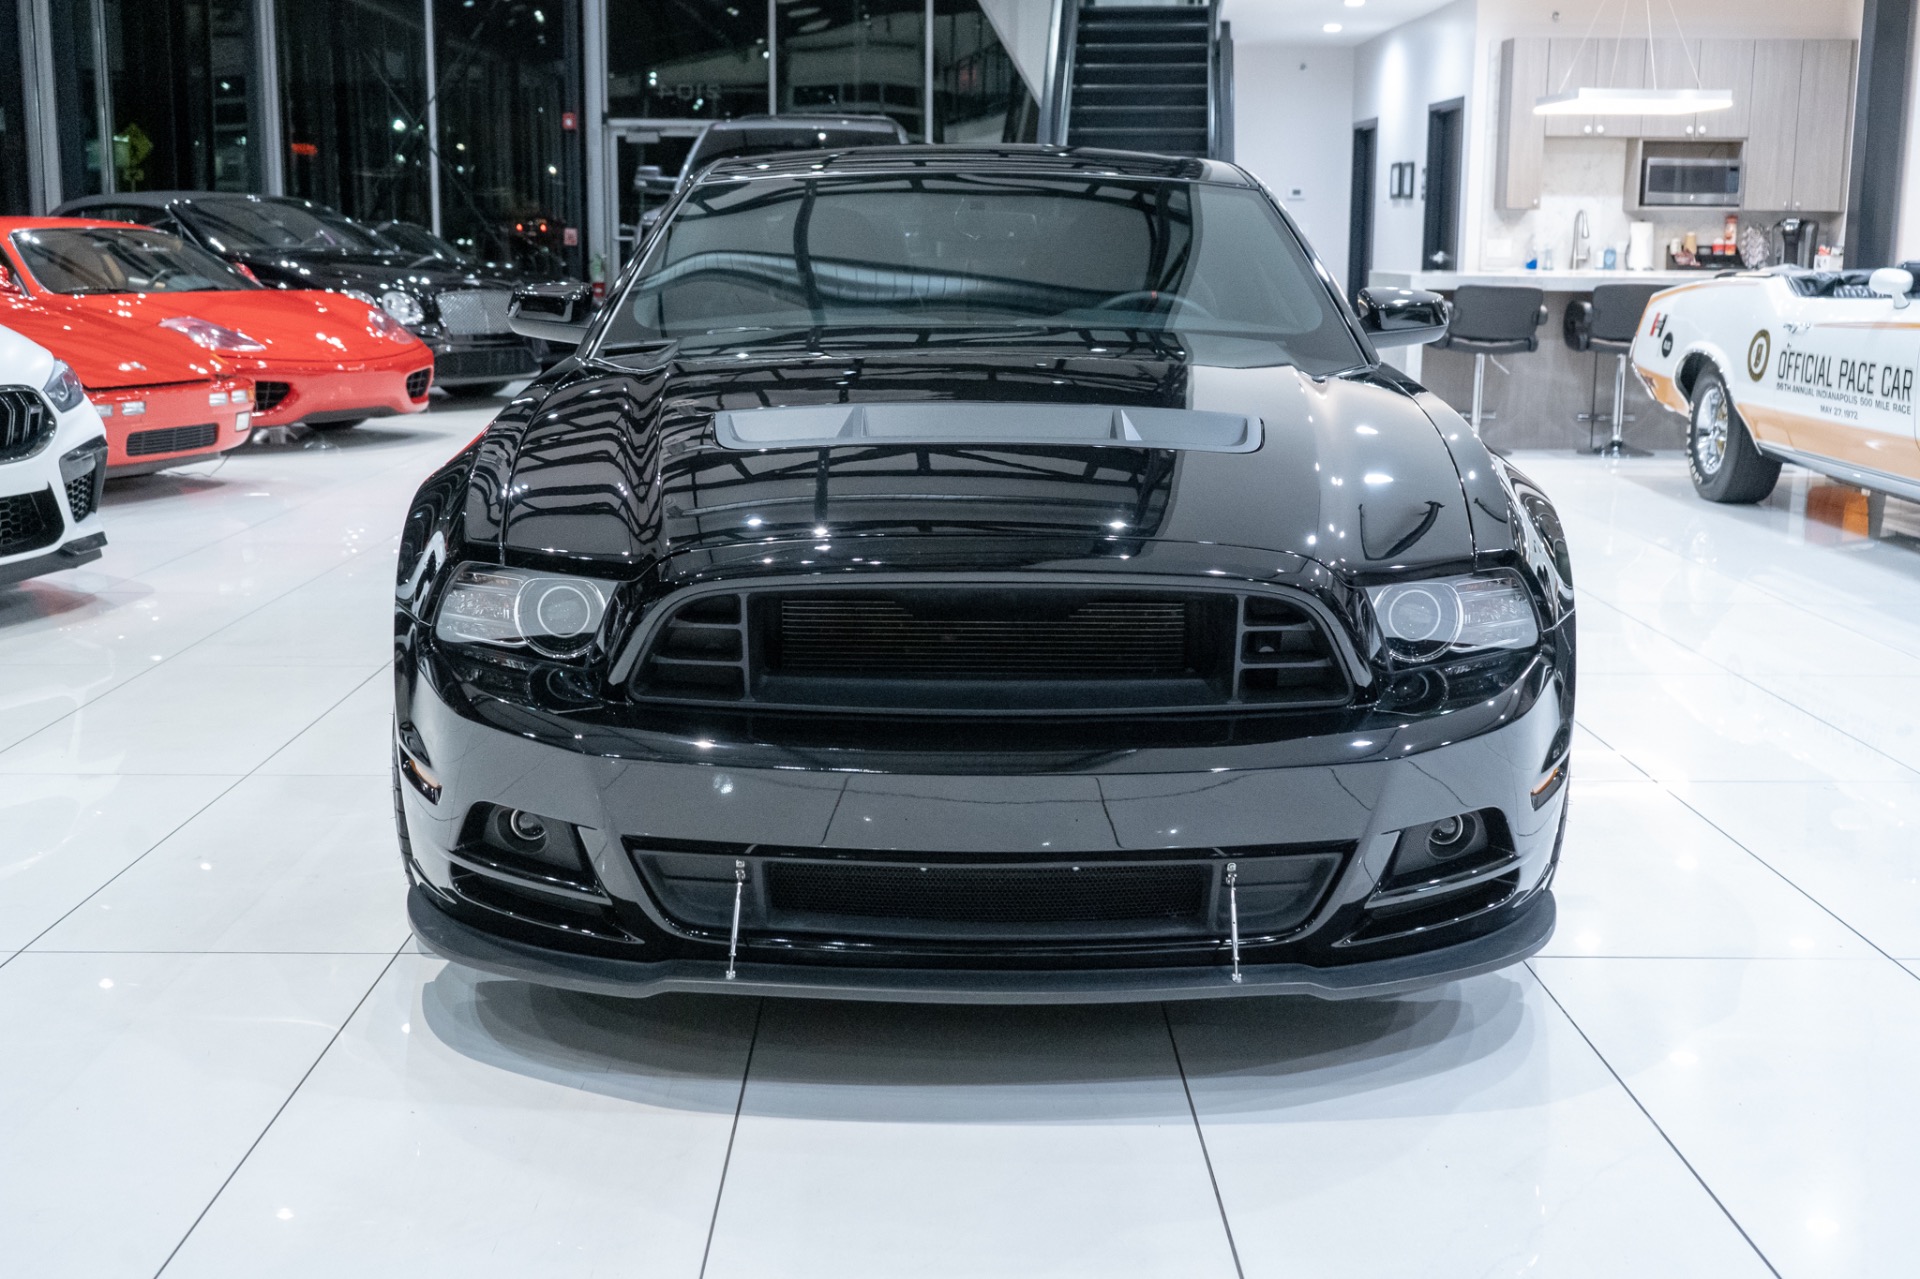 Used-2014-Ford-Mustang-GT-PAXTON-SUPERCHARGED-660HP-AT-THE-WHEELS-TENS-OF-THOUSANDS-IN-UPGRADES